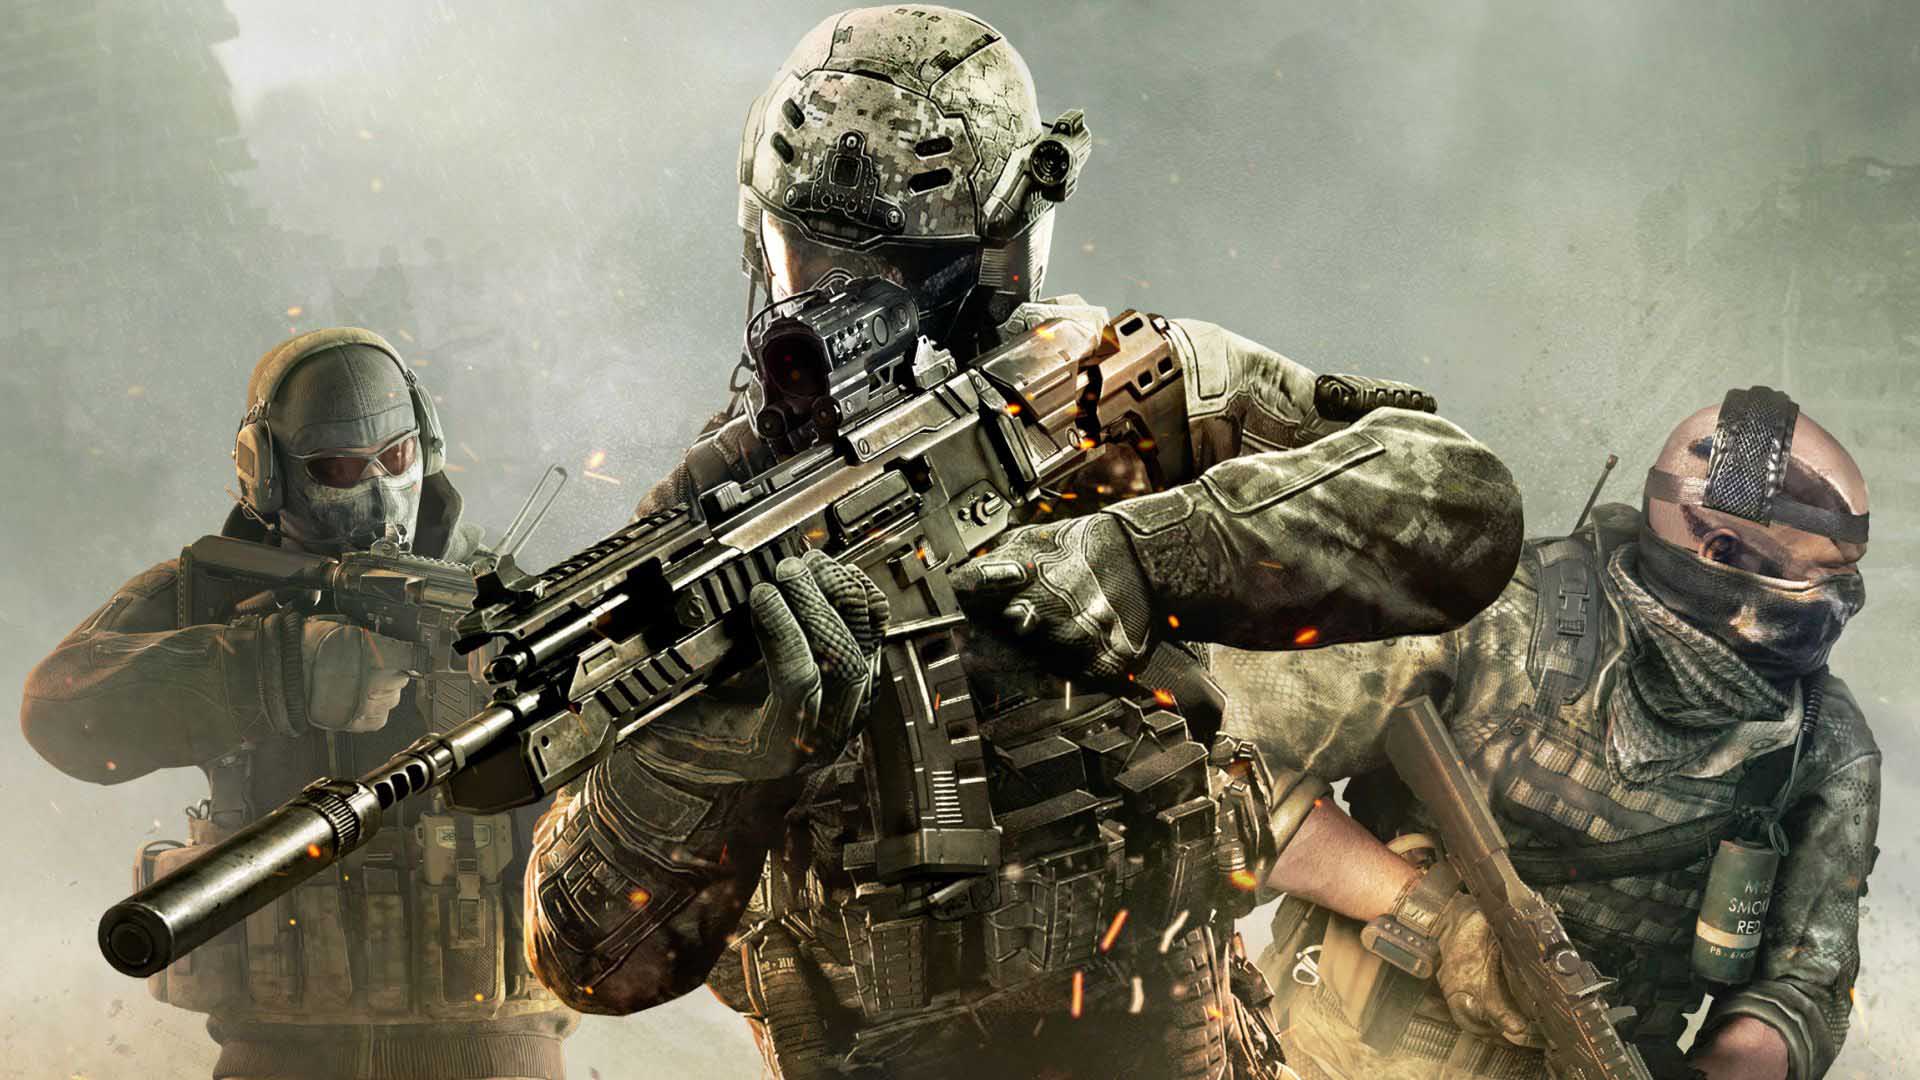 120+] Download Call of Duty Wallpapers for Desktop & Mobile (FHD)